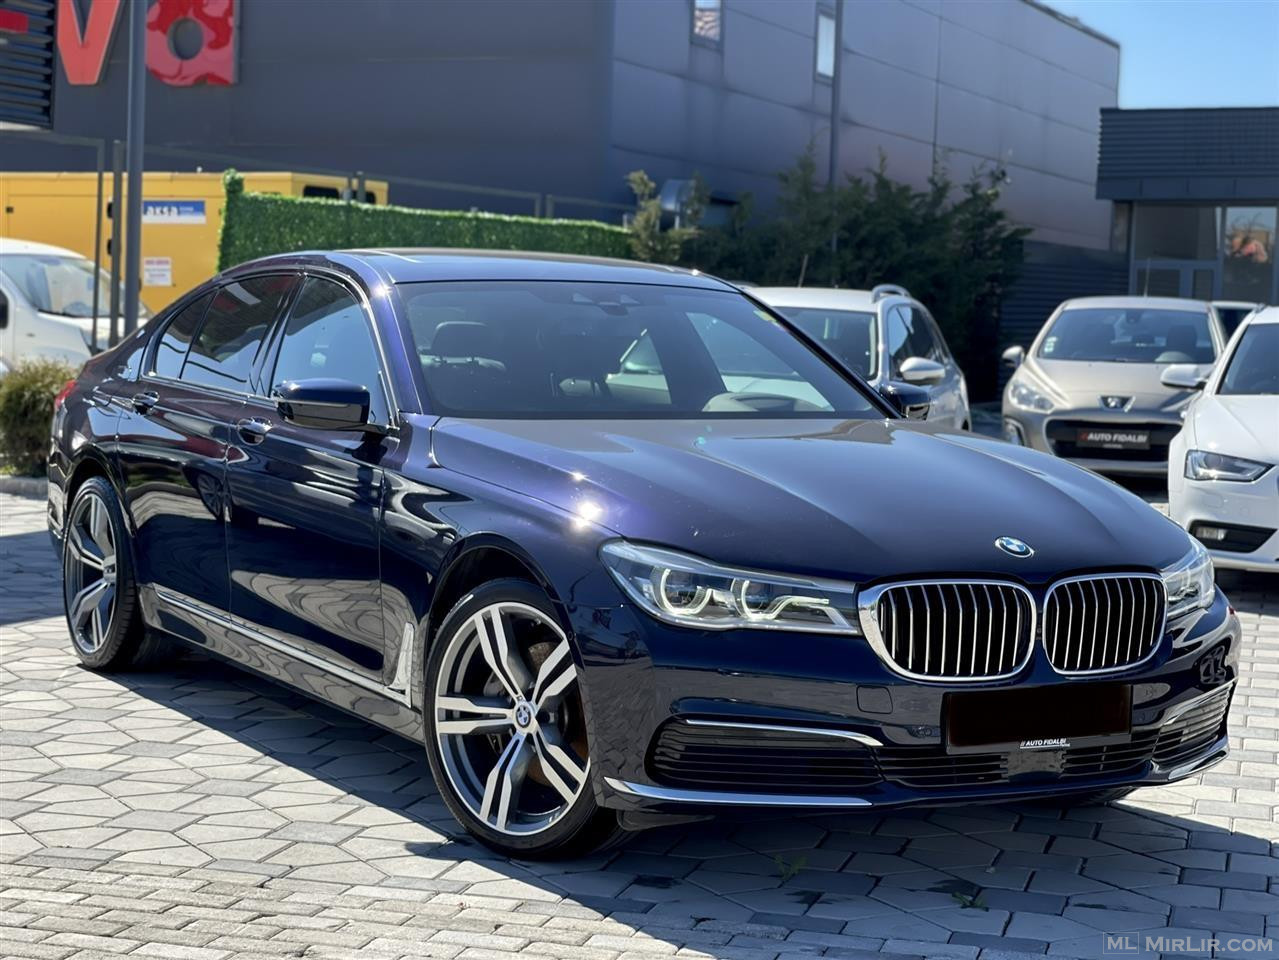 BMW 730 D Xdrive Laserlight* Full Opsione 2016 